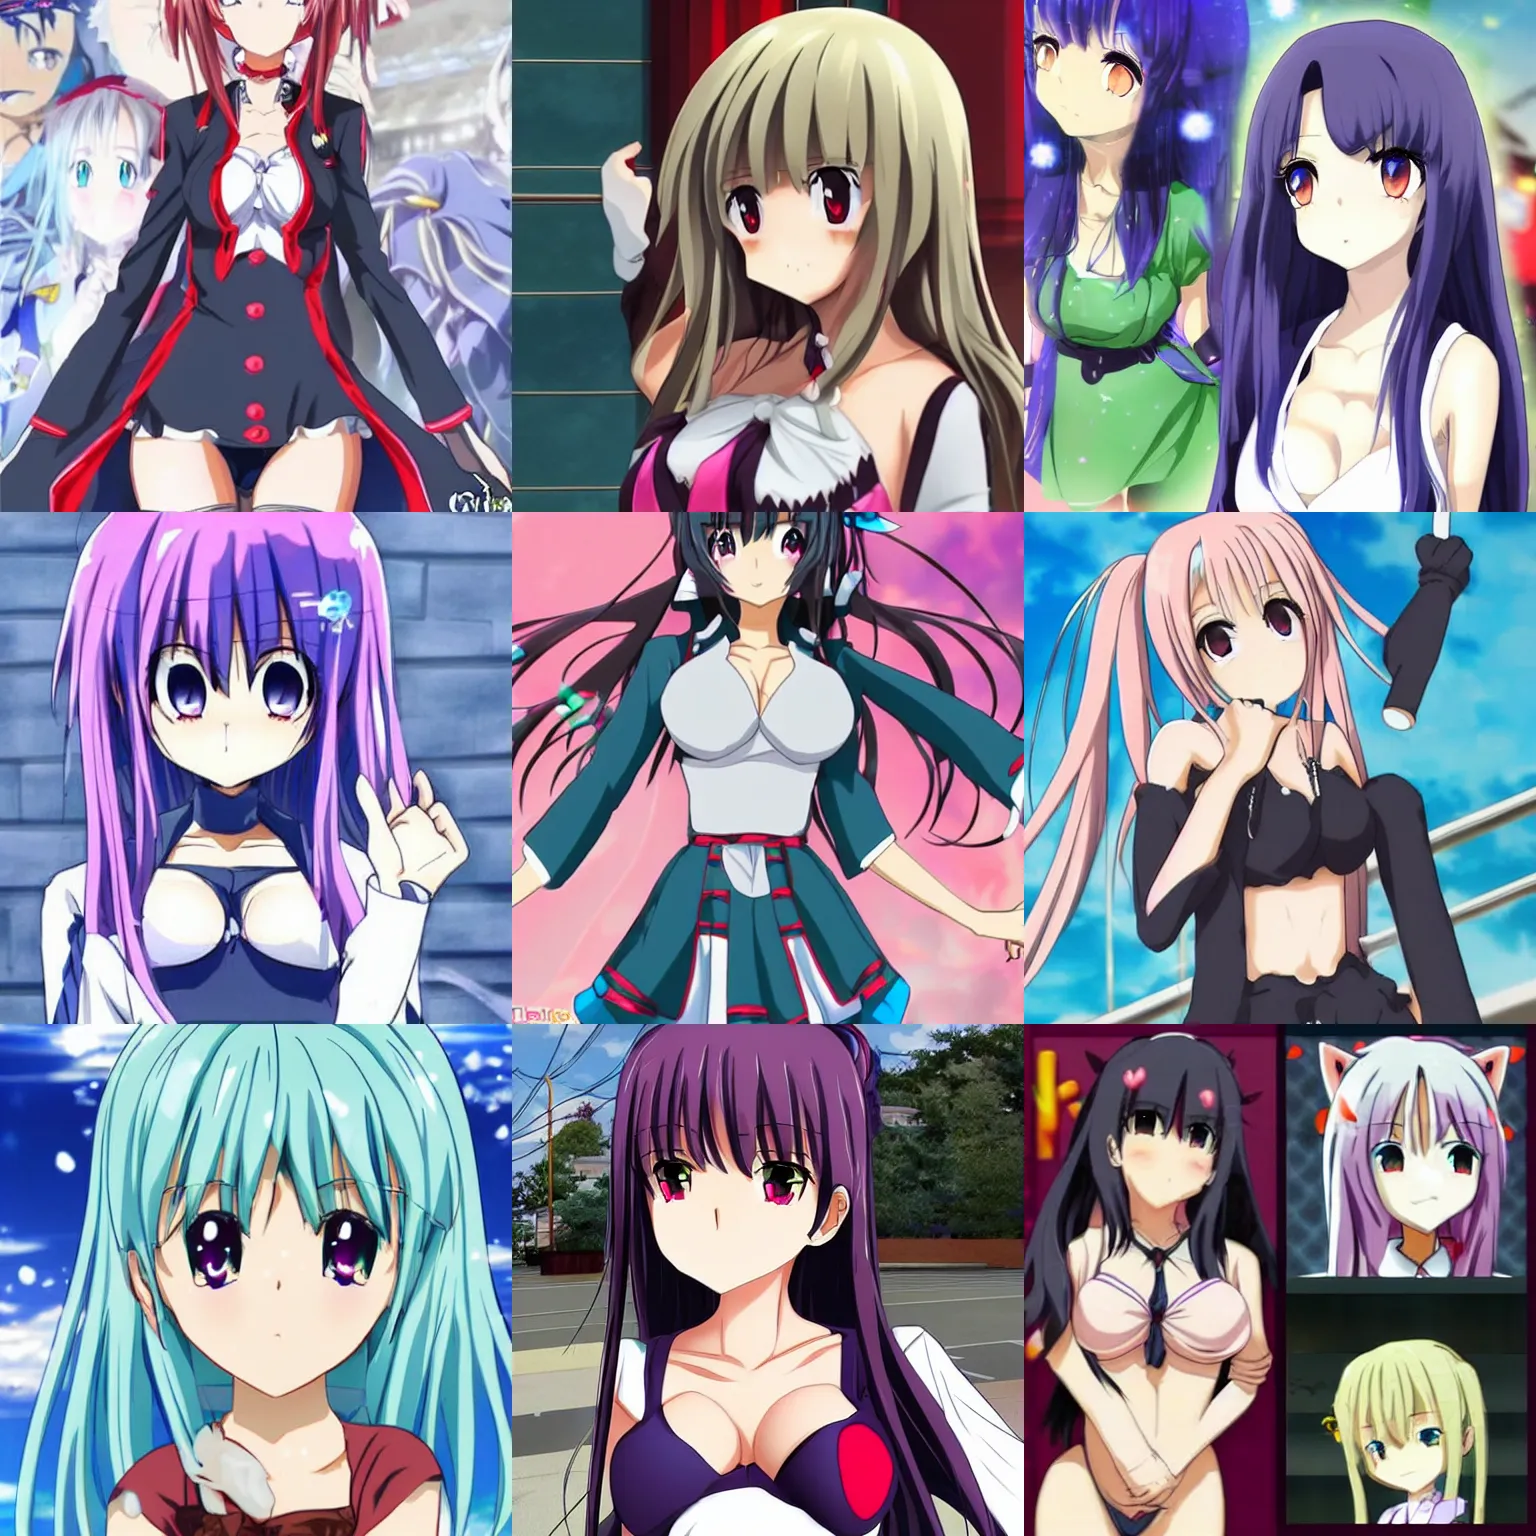 30 Anime Girl Personality Types and Waifu Tropes - Dubsnatch